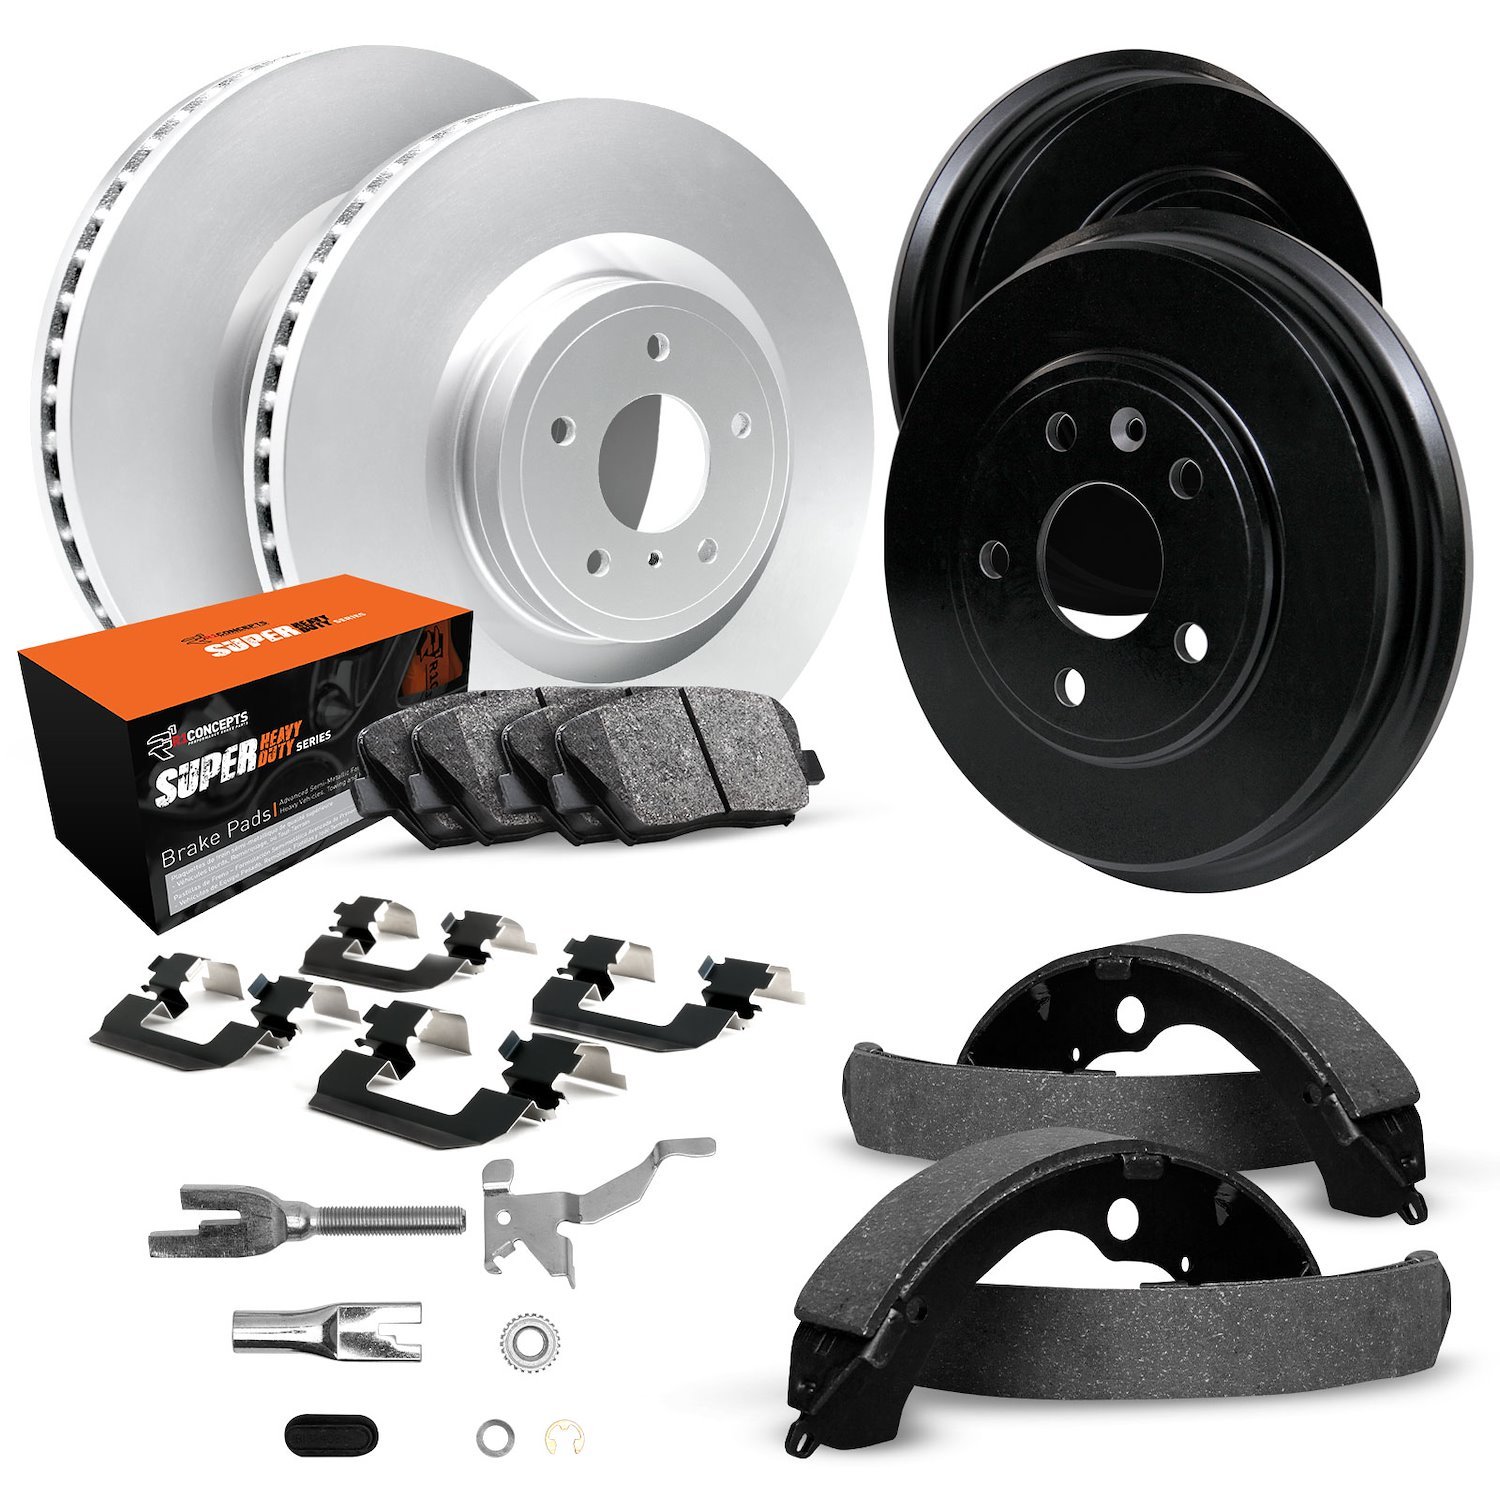 GEO-Carbon Brake Rotor & Drum Set w/Super-Duty Pads, Shoes, Hardware/Adjusters, 1975-1996 GM, Position: Front & Rear